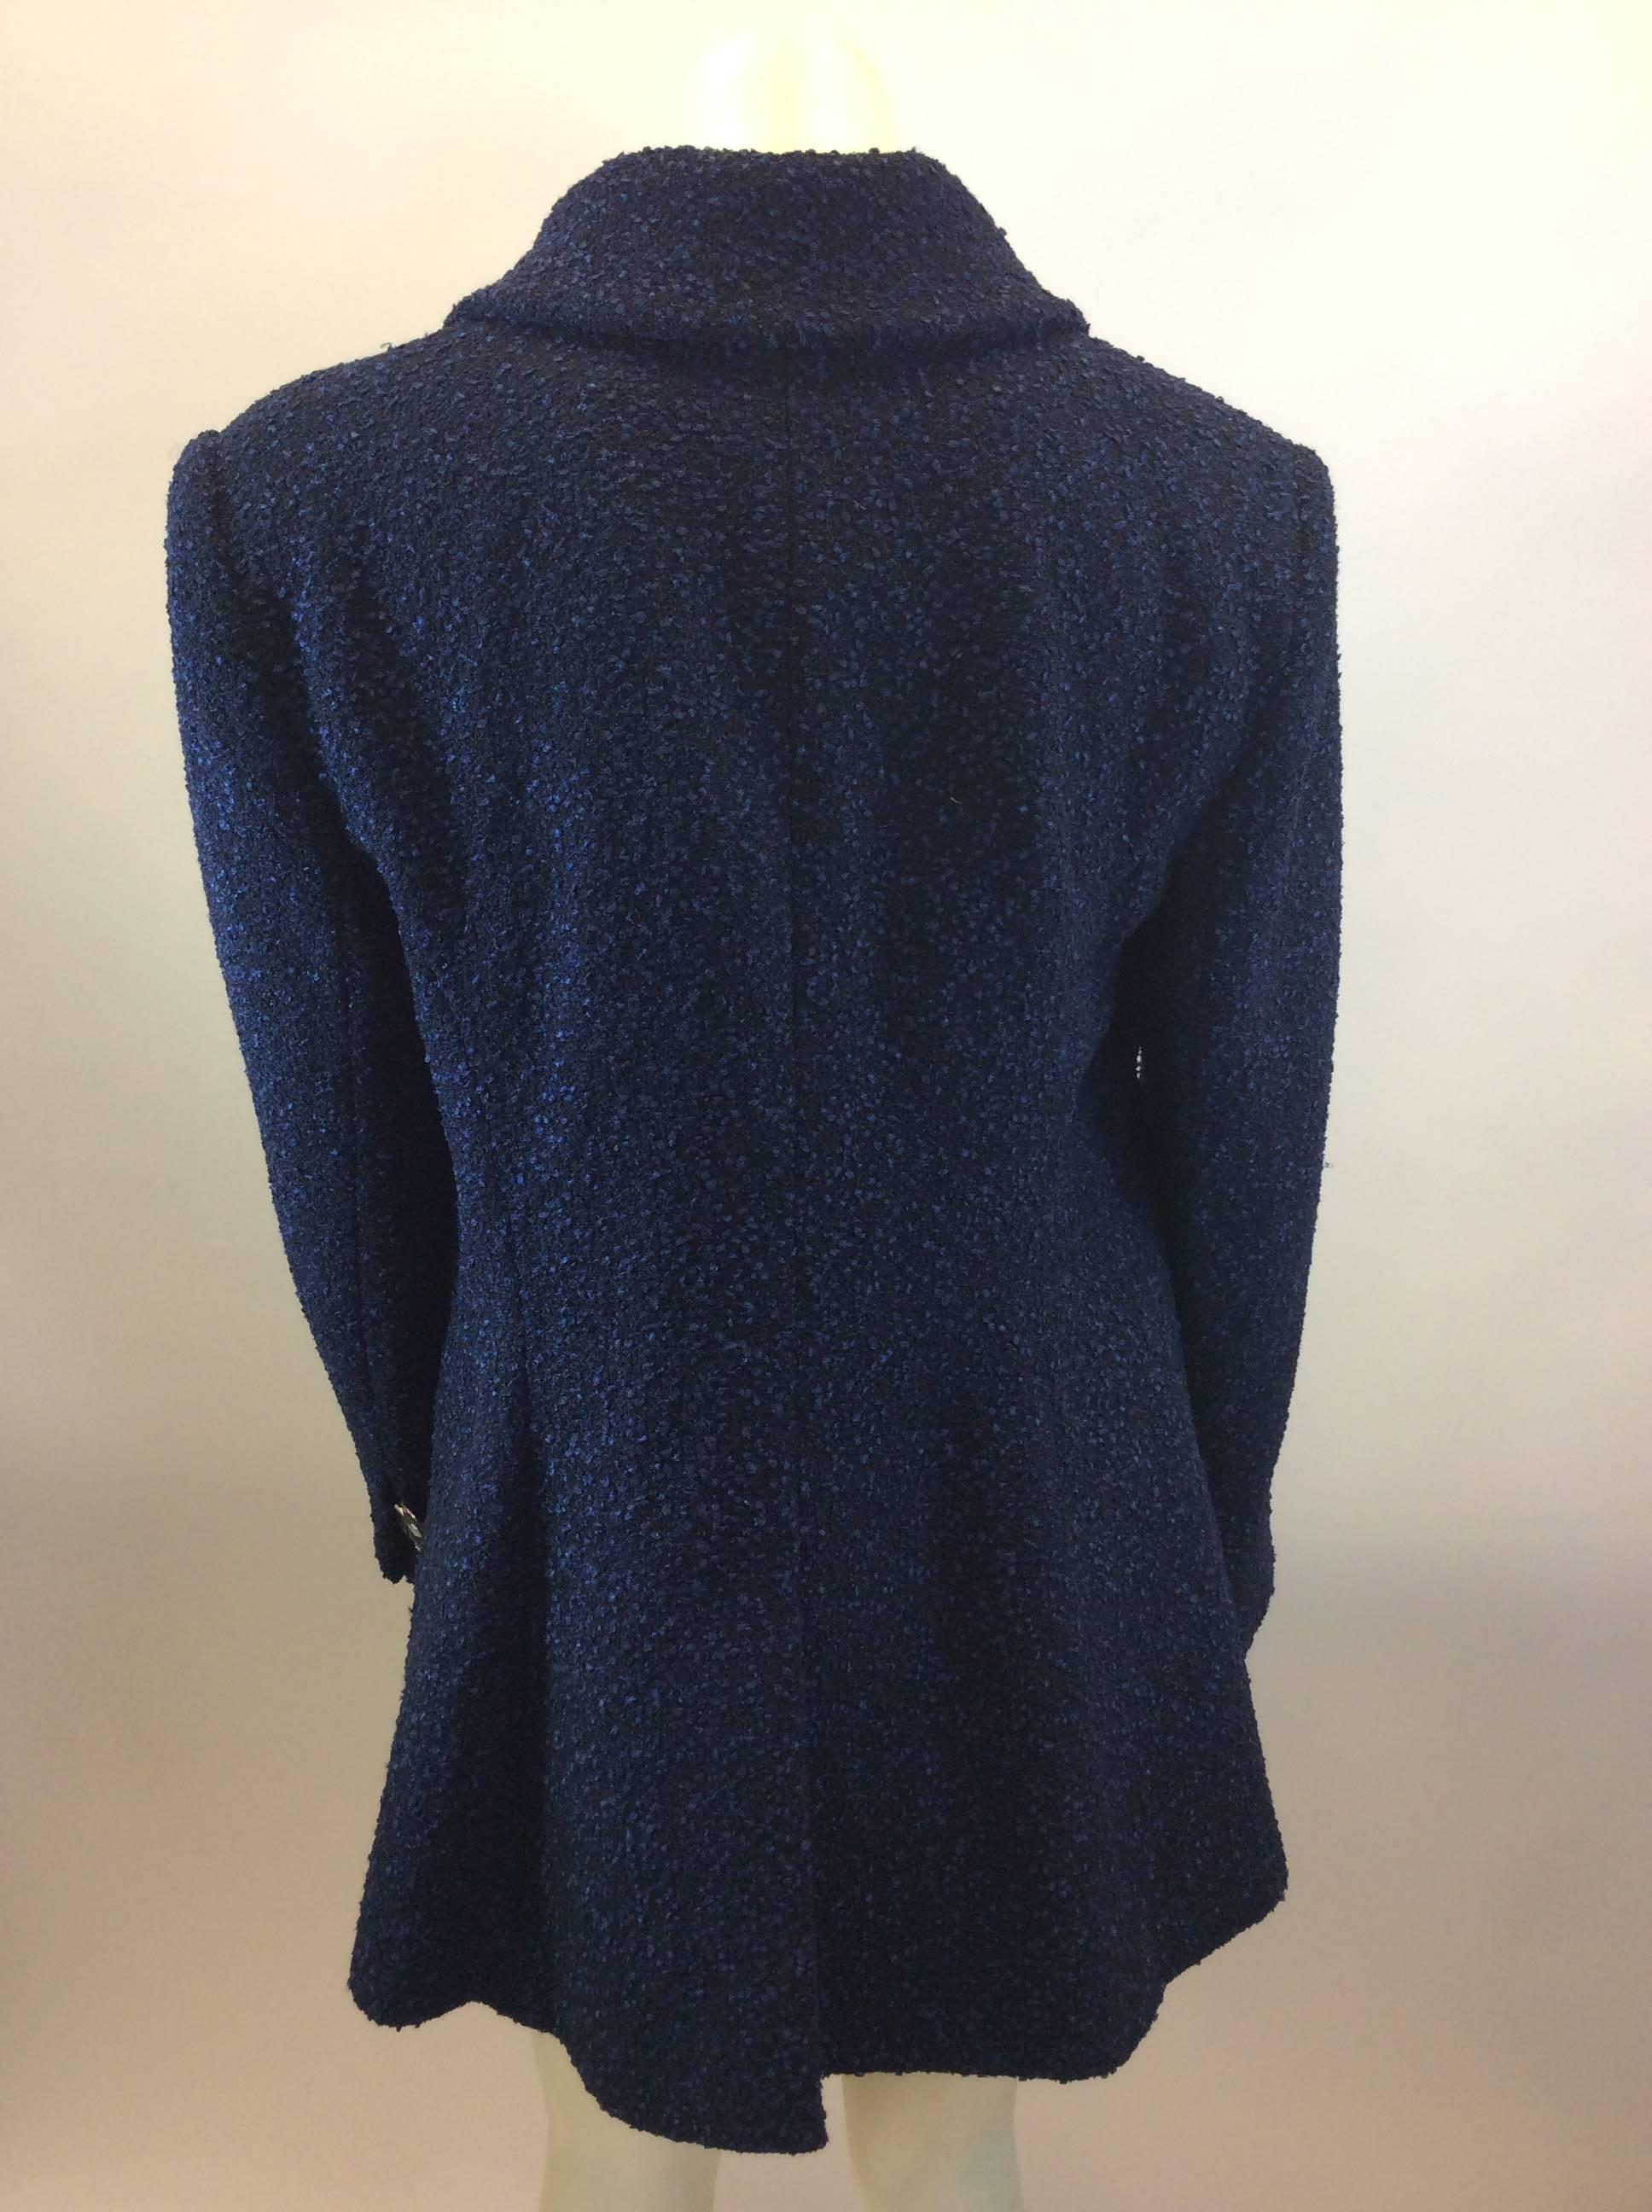 Chanel Blue and Black Jacket with Silver Hardware In Excellent Condition For Sale In Narberth, PA